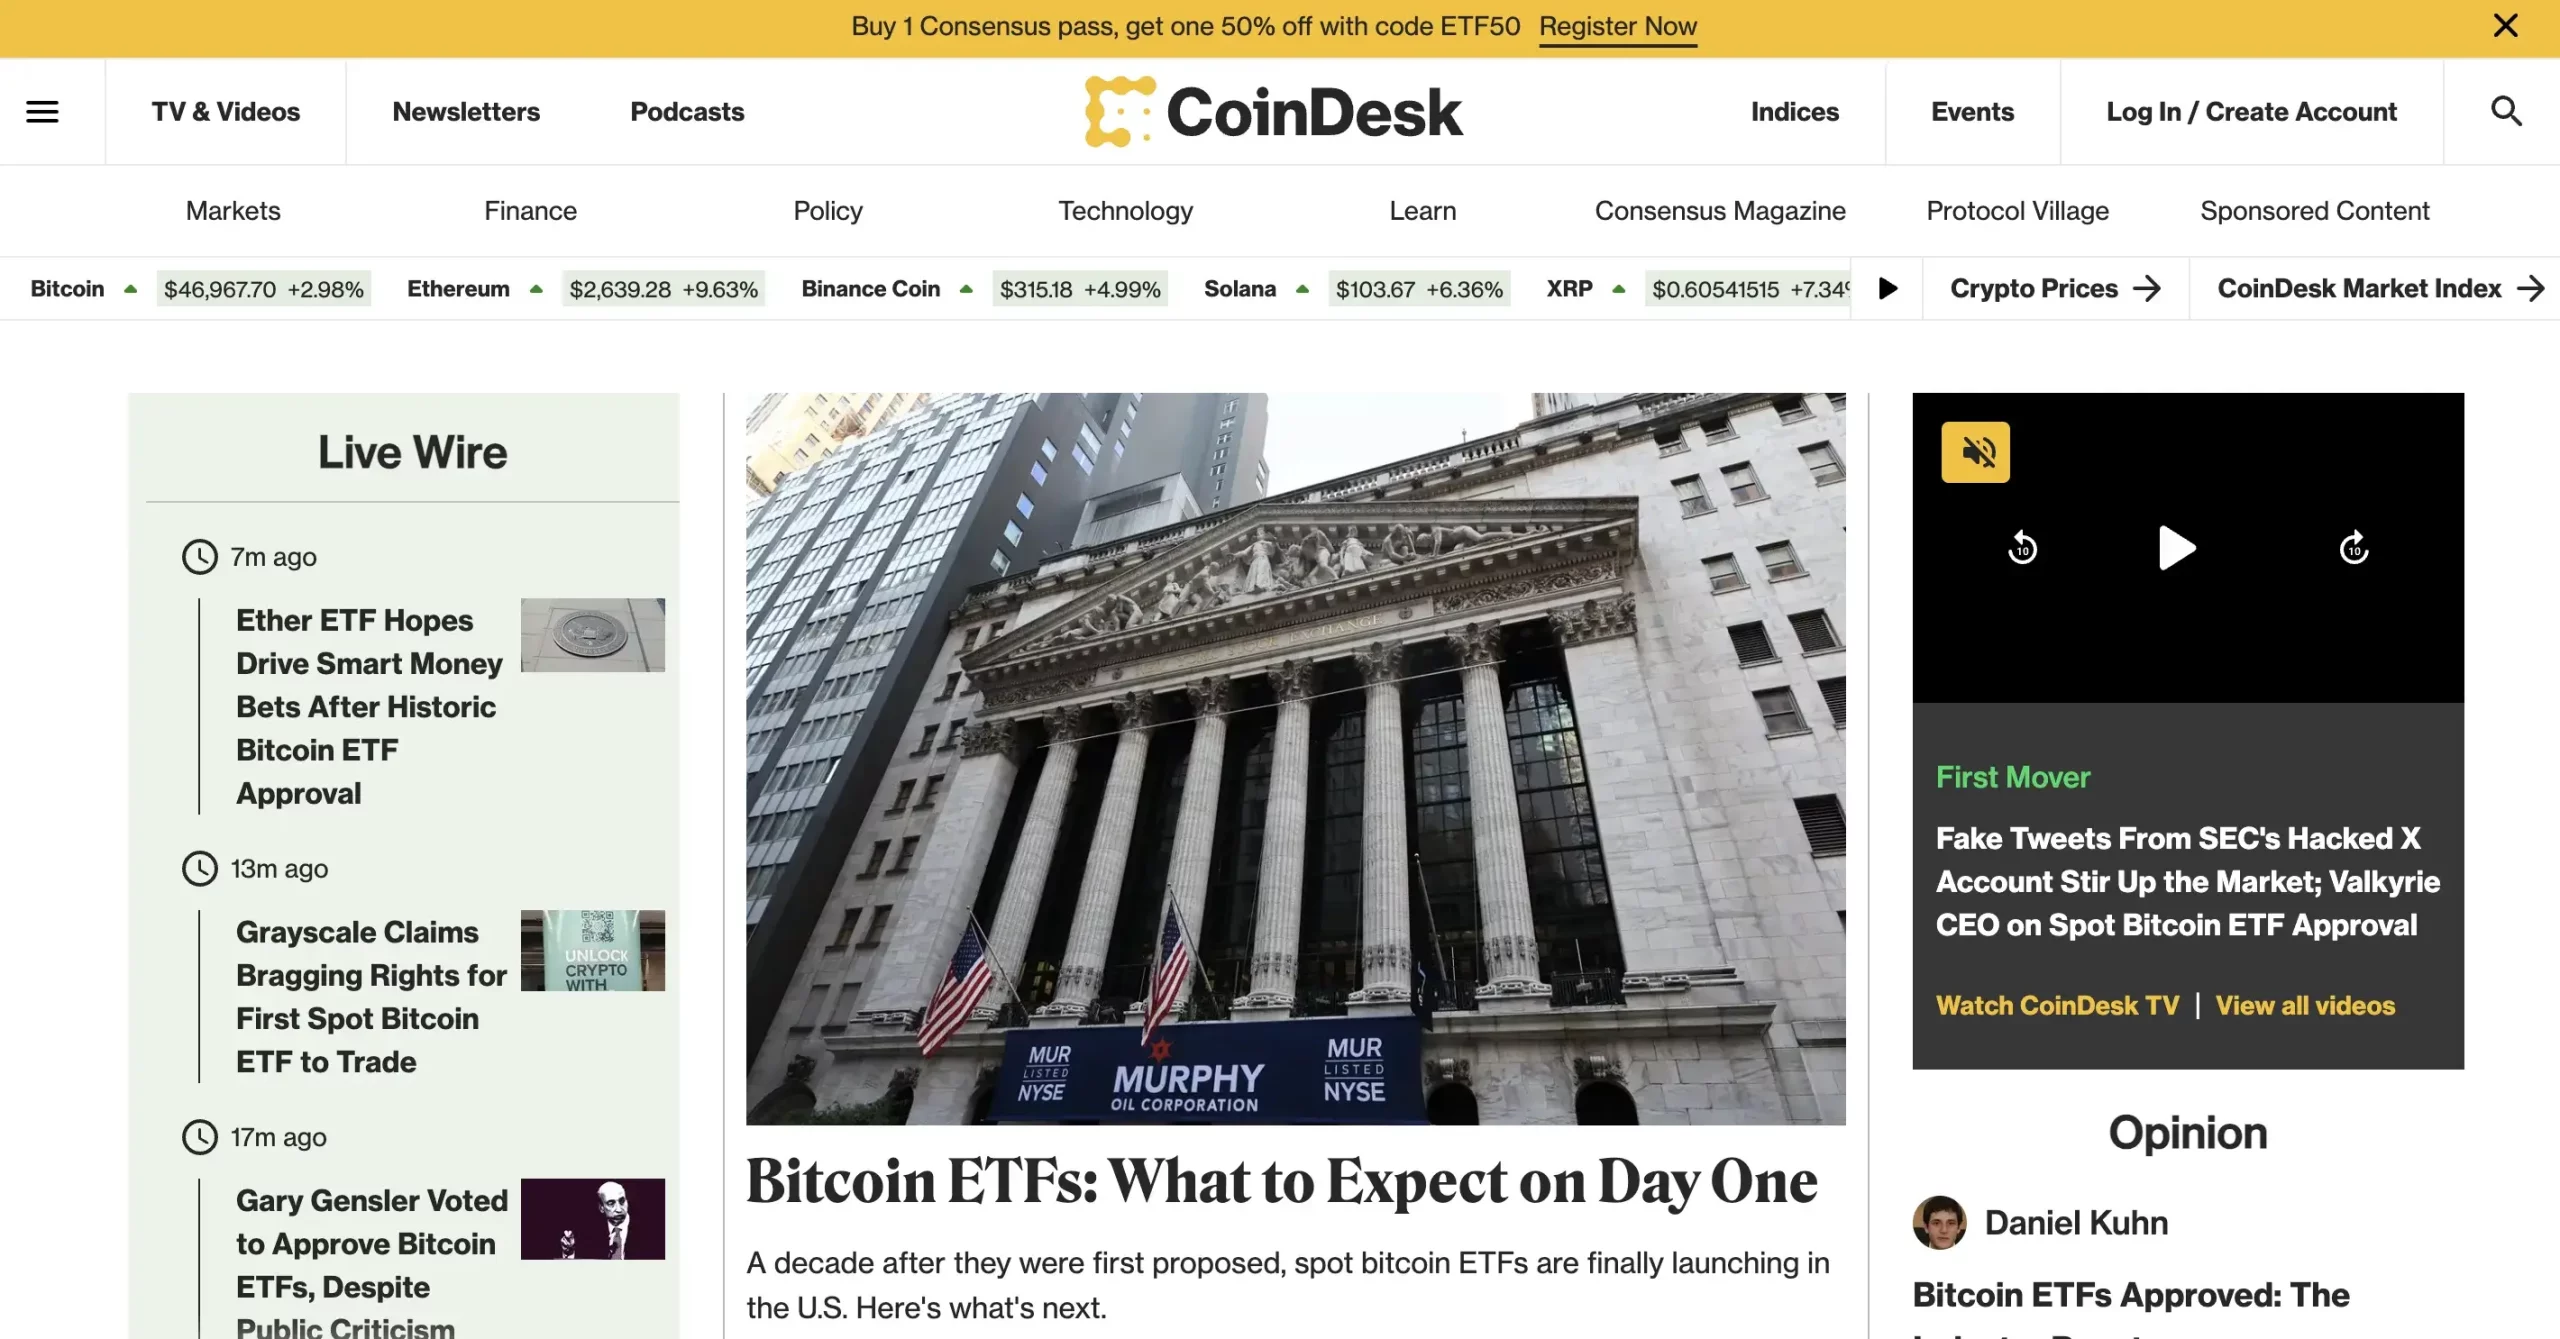 8. CoinDesk